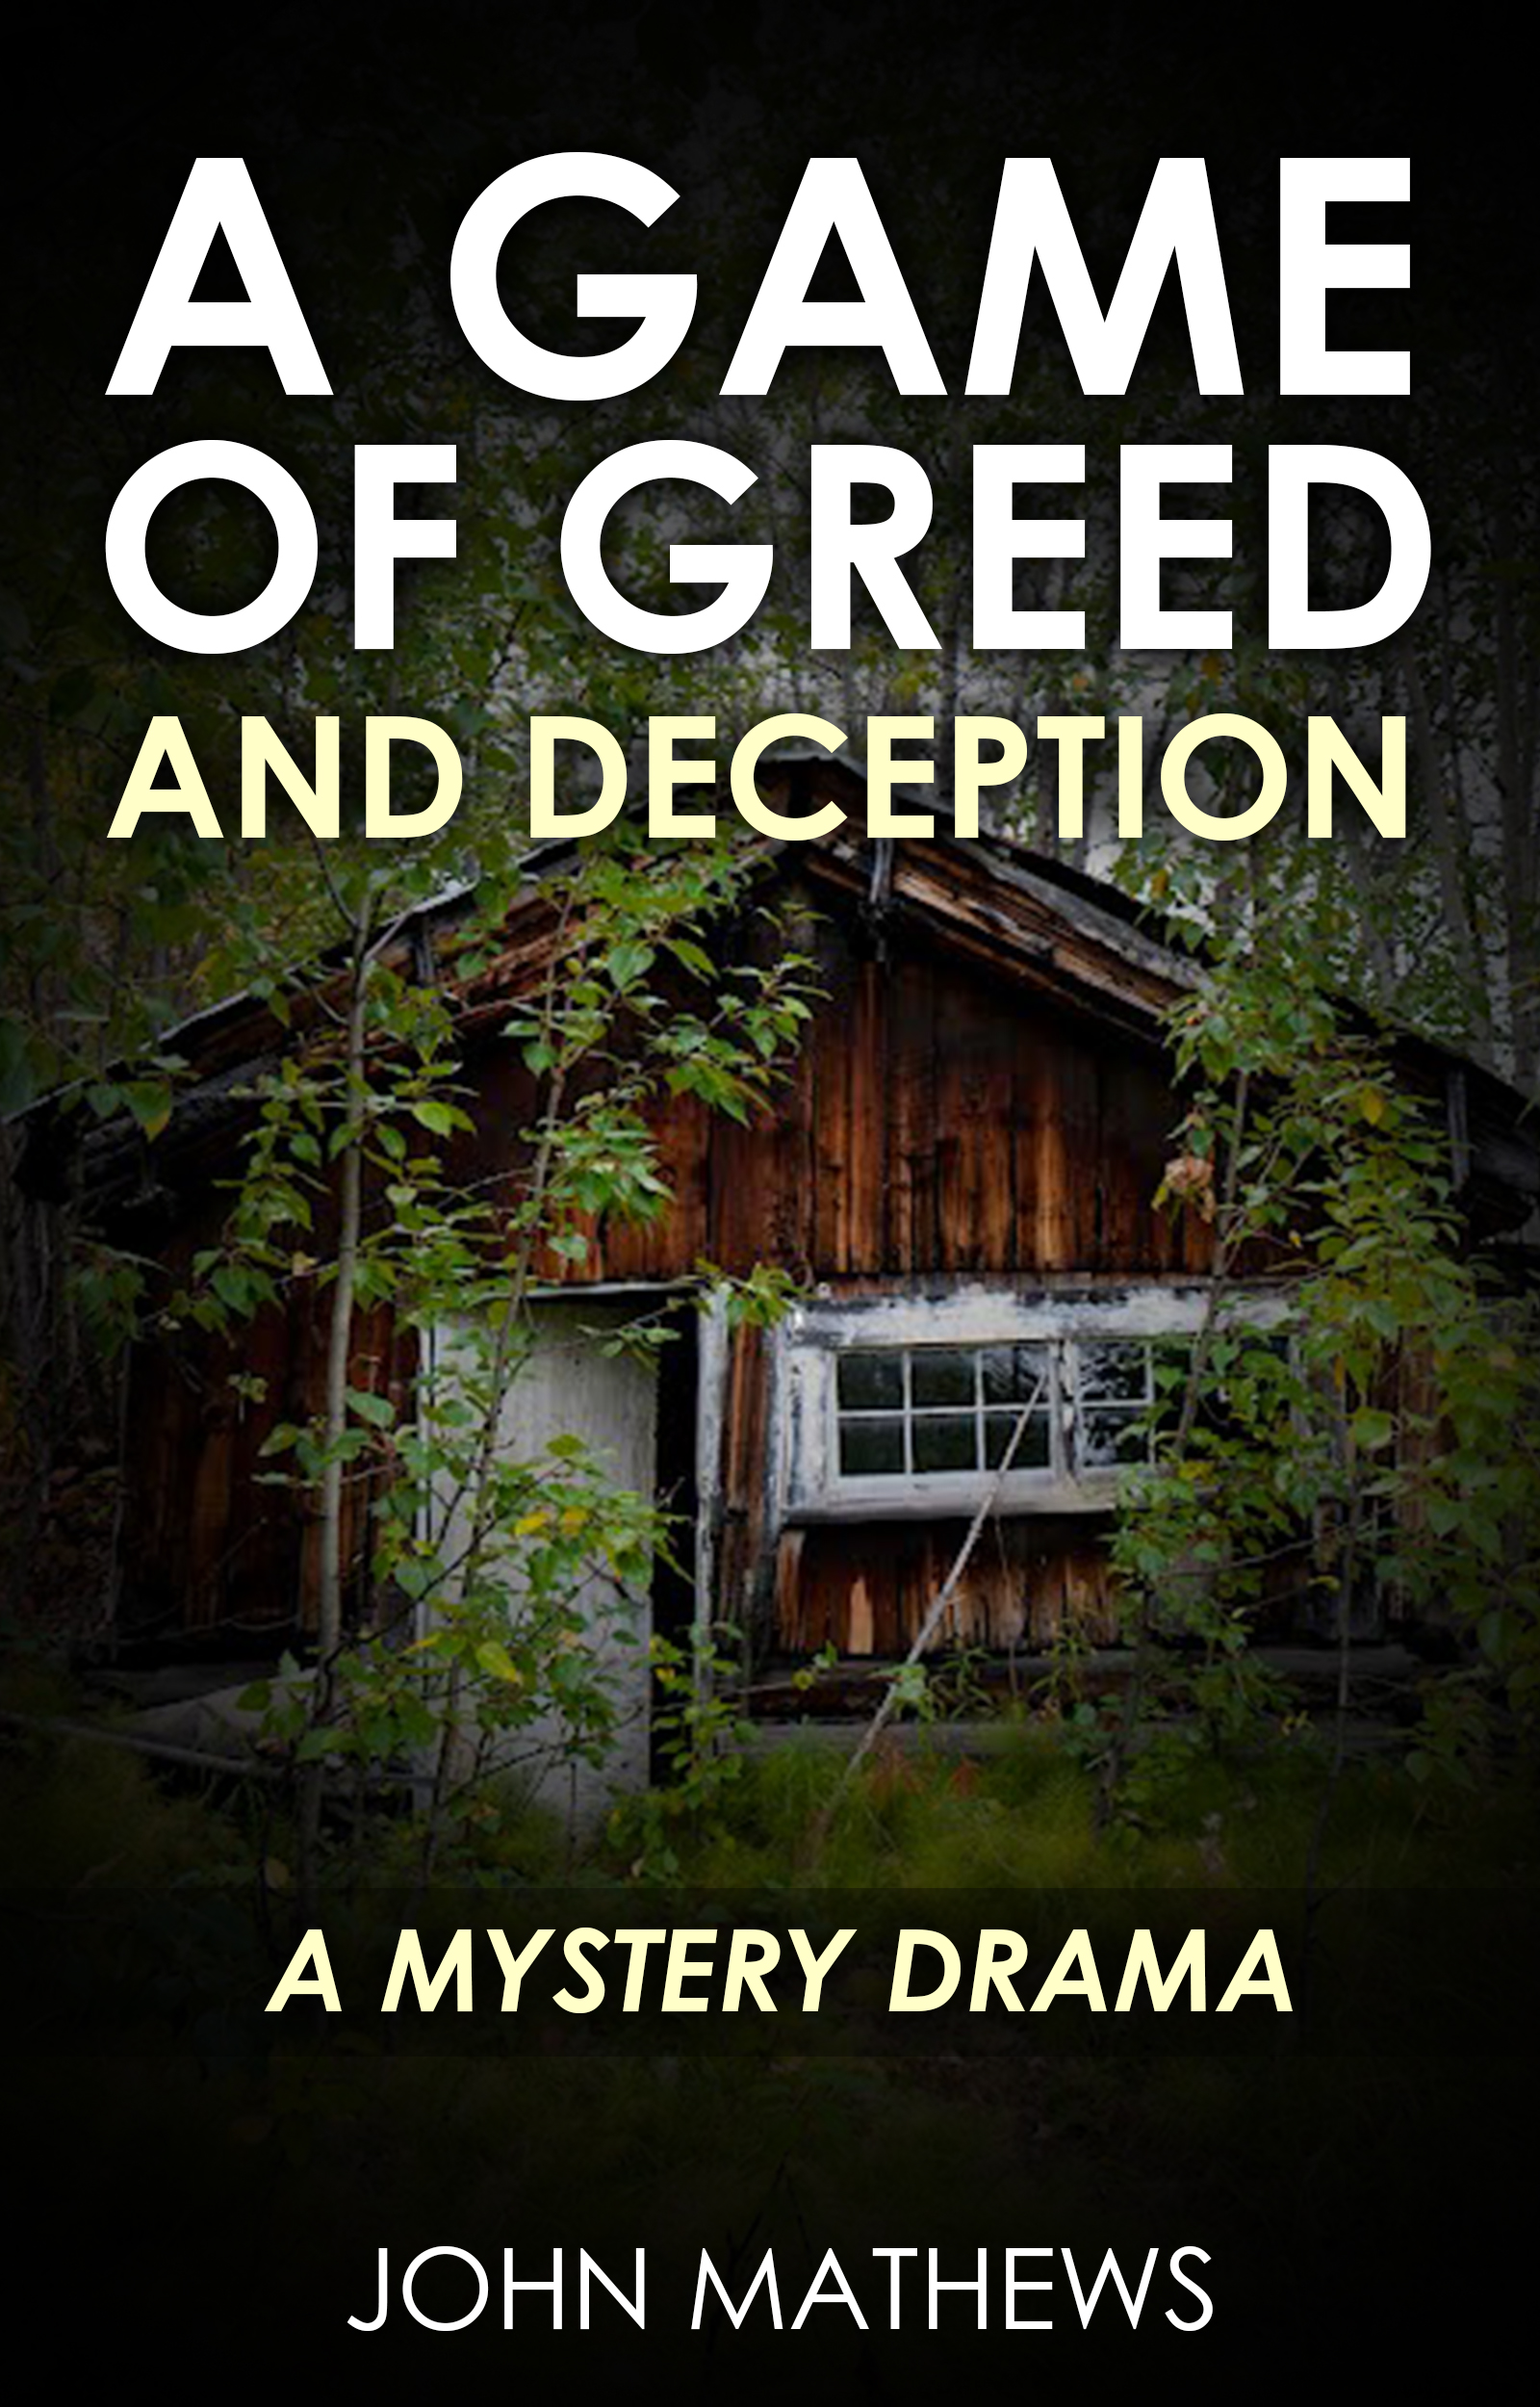 FREE: A Game of Greed and Deception by John Mathews